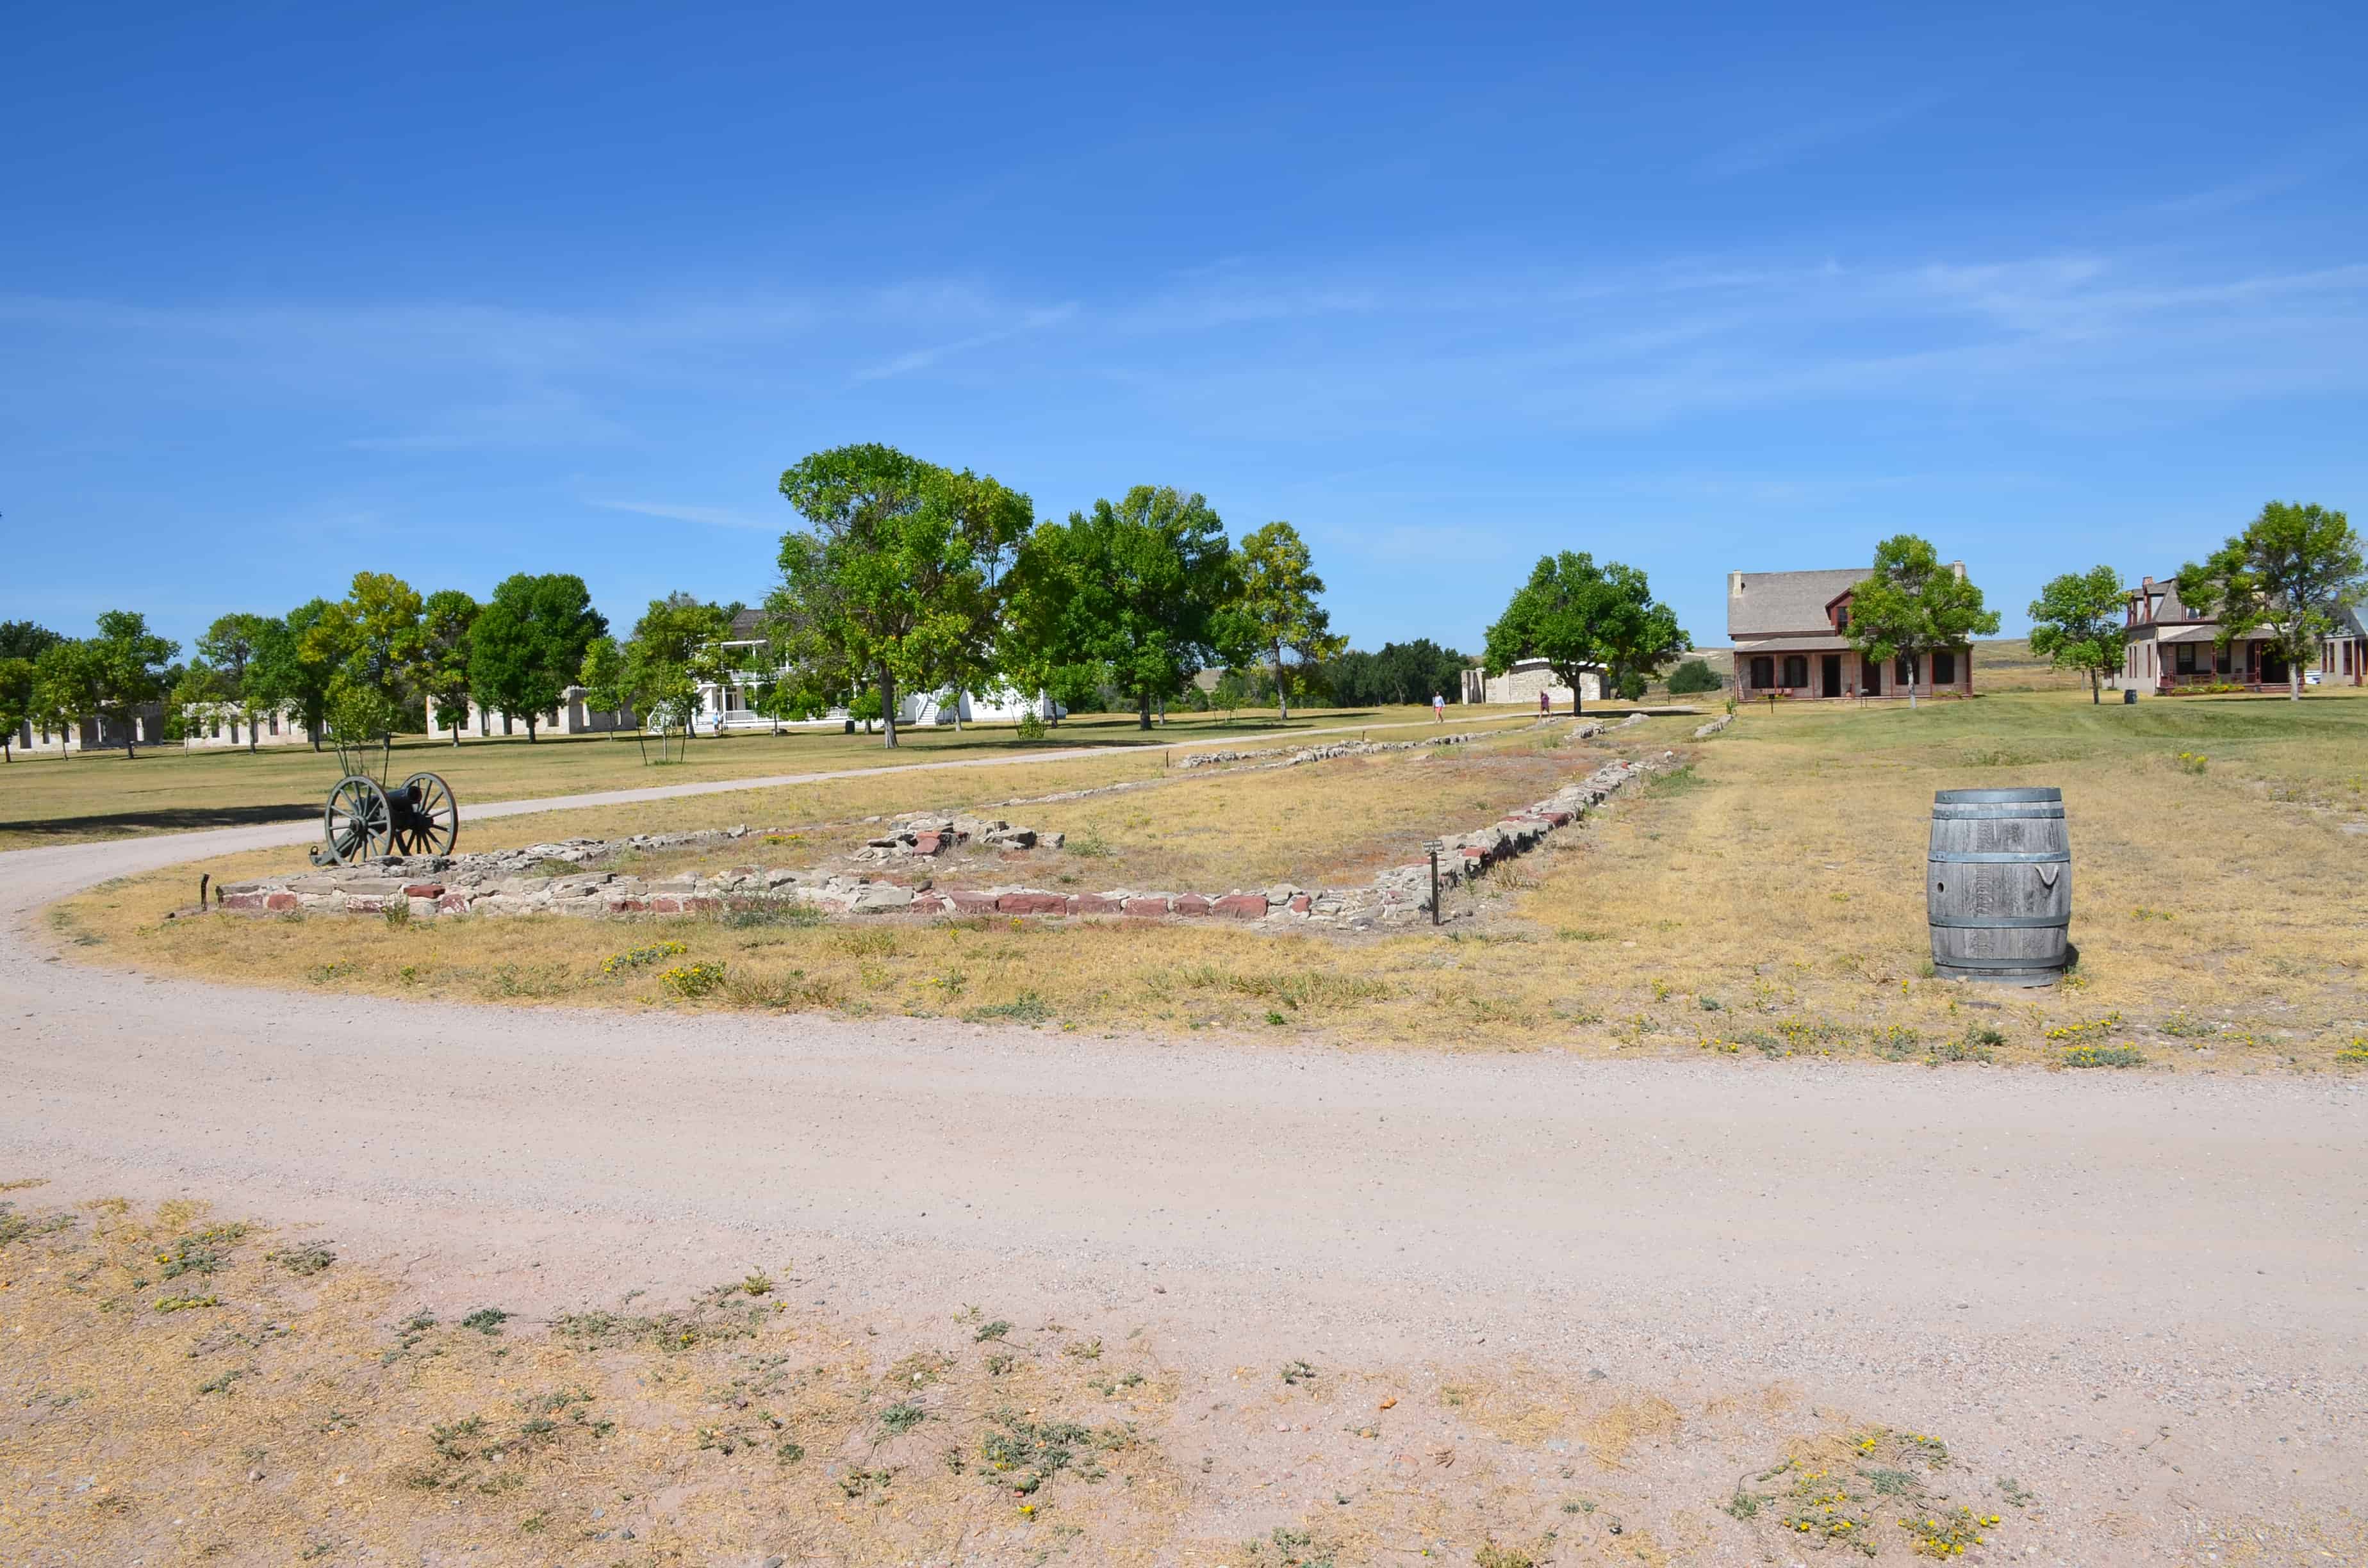 Infantry barracks at Fort Laramie National Historic Site in Wyoming